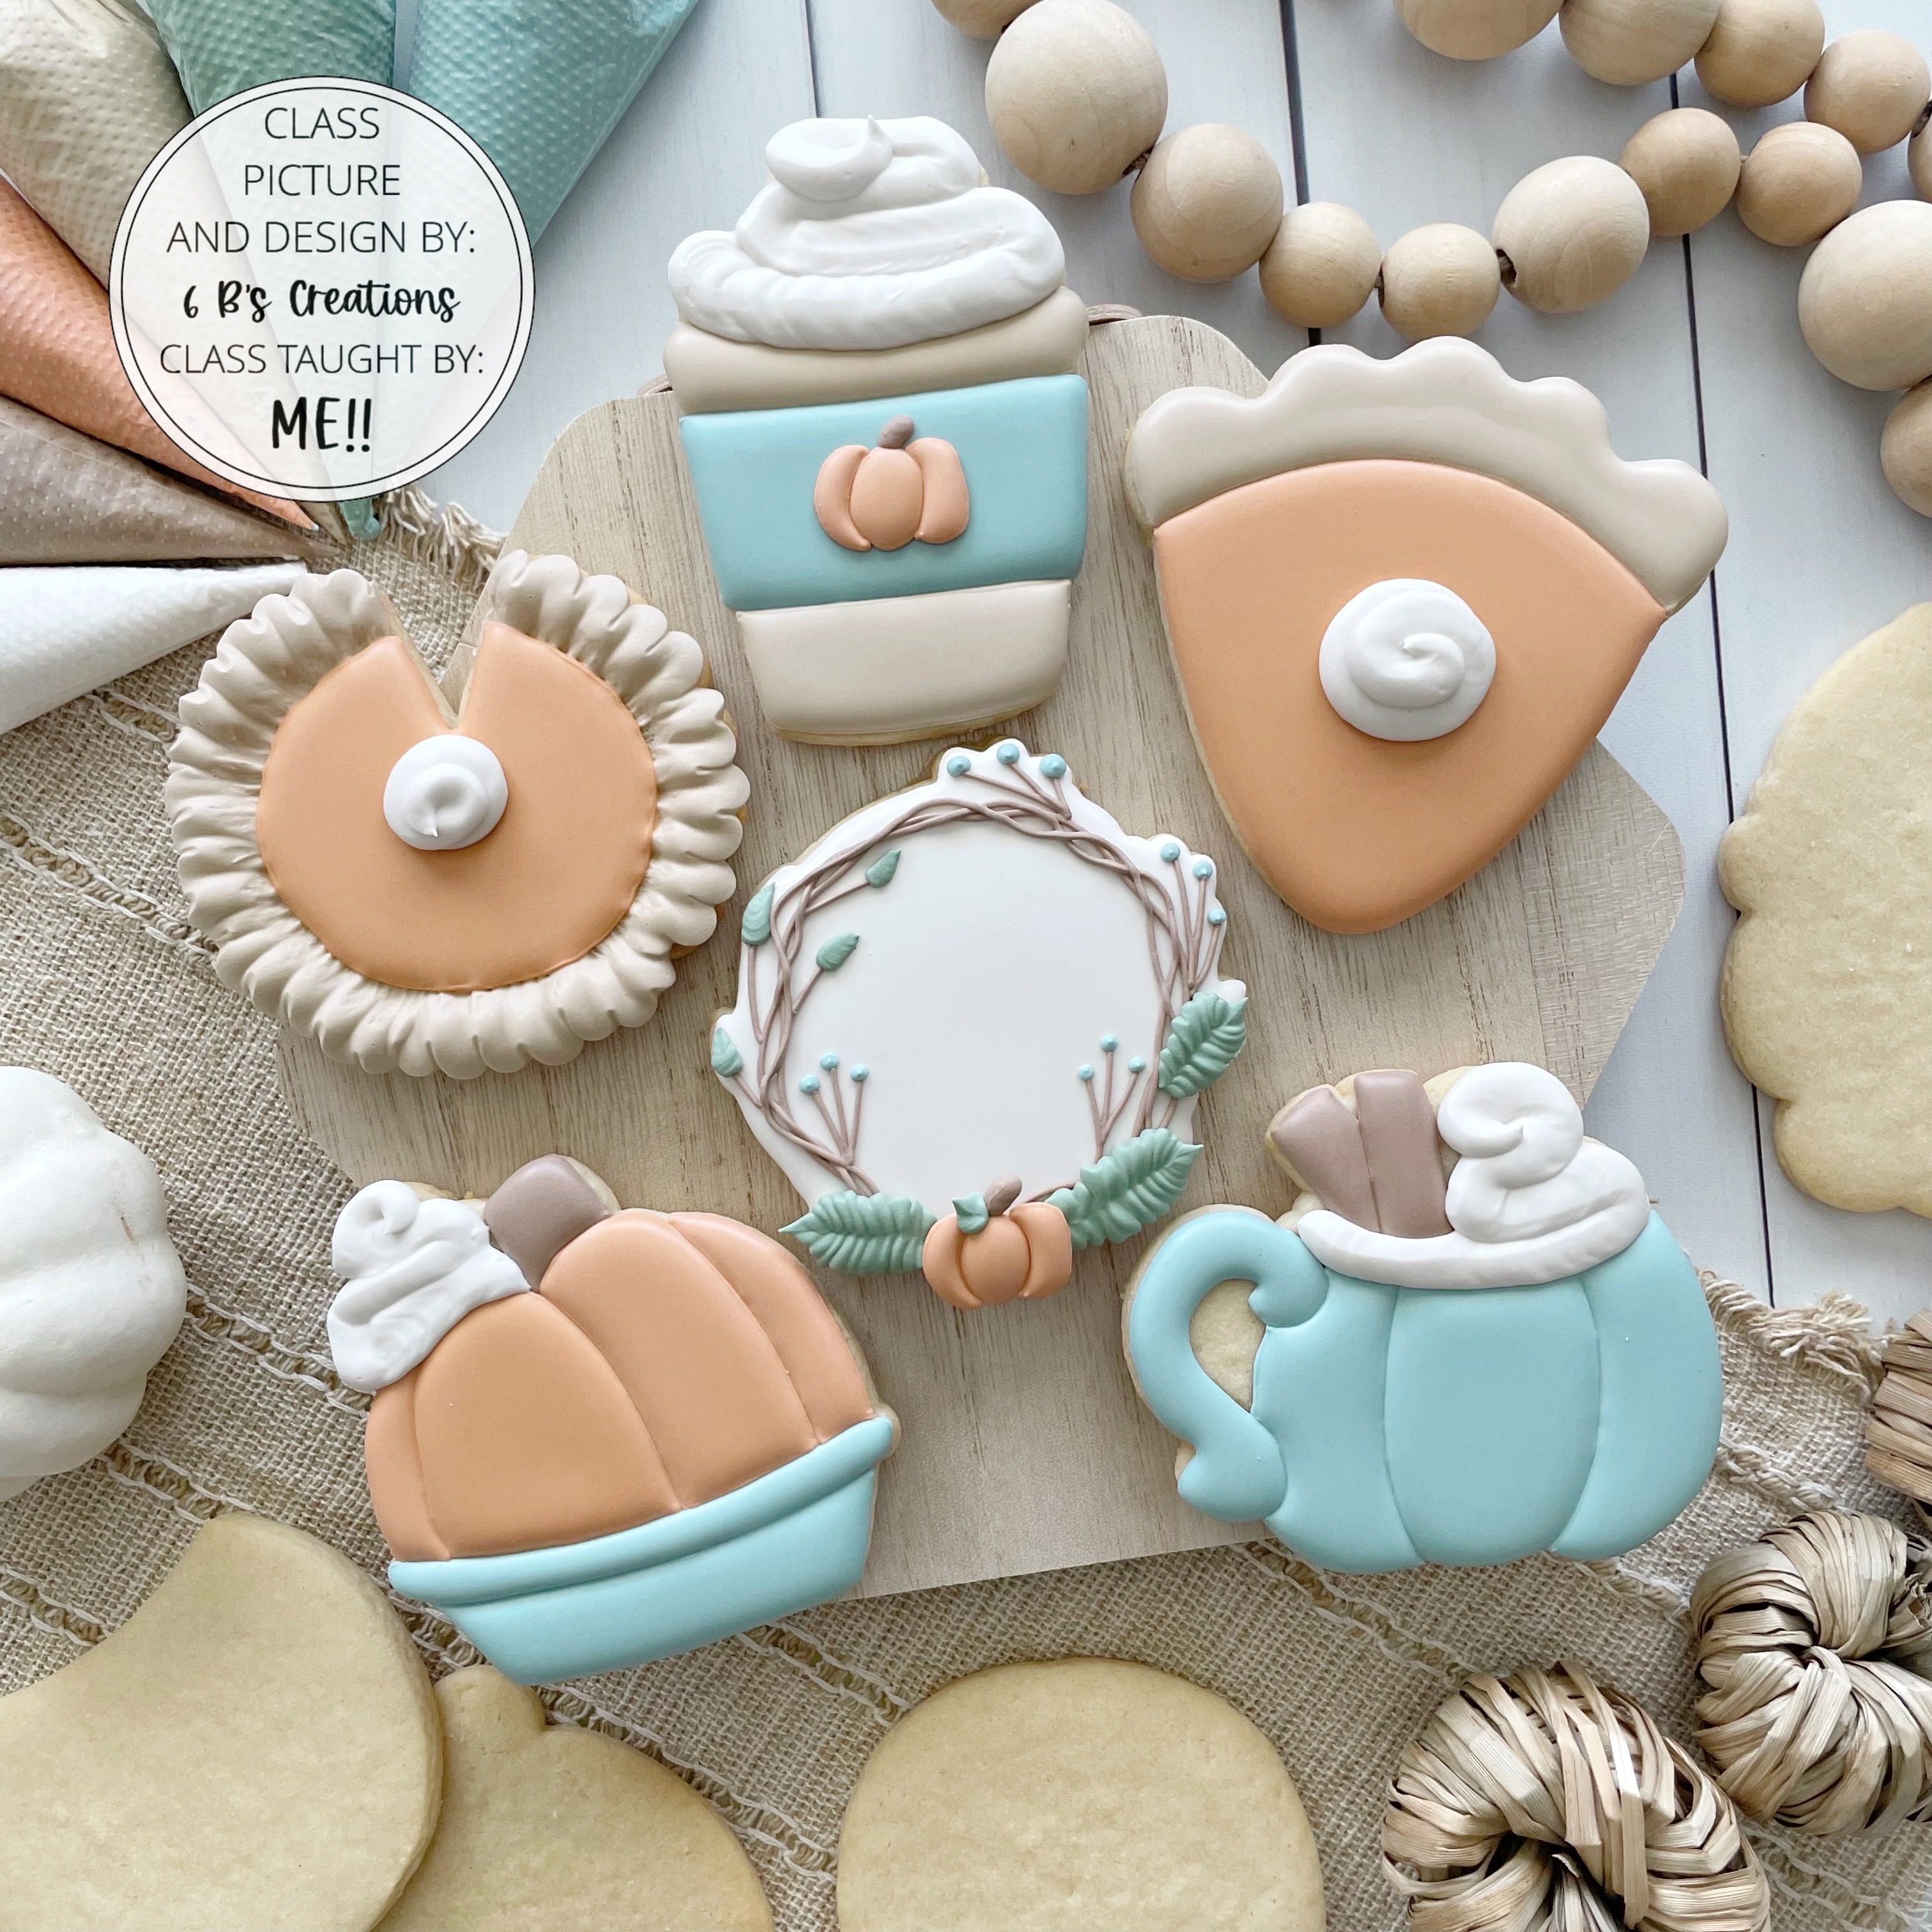 PRIVATE Pumpkin Spice Cookie Decorating Class Hosted by Tammy Sharp